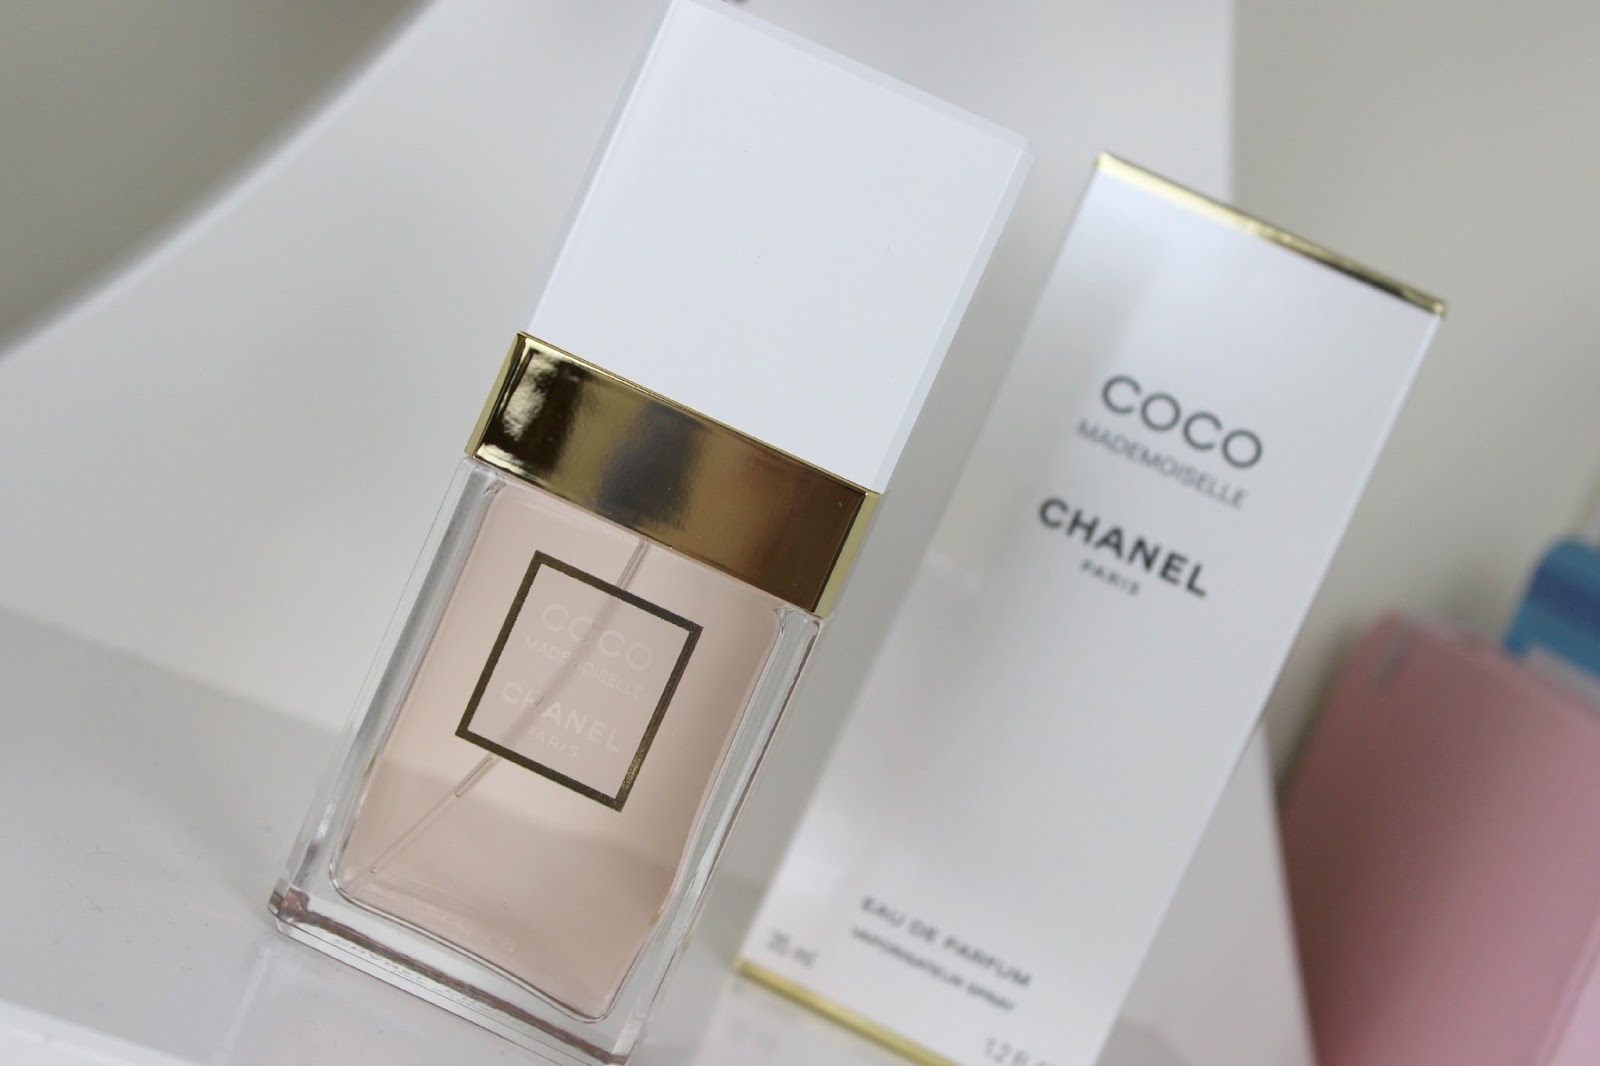 CHANEL Coco Mademoiselle – Not Your Ordinary Fragrance - Her Etiquette